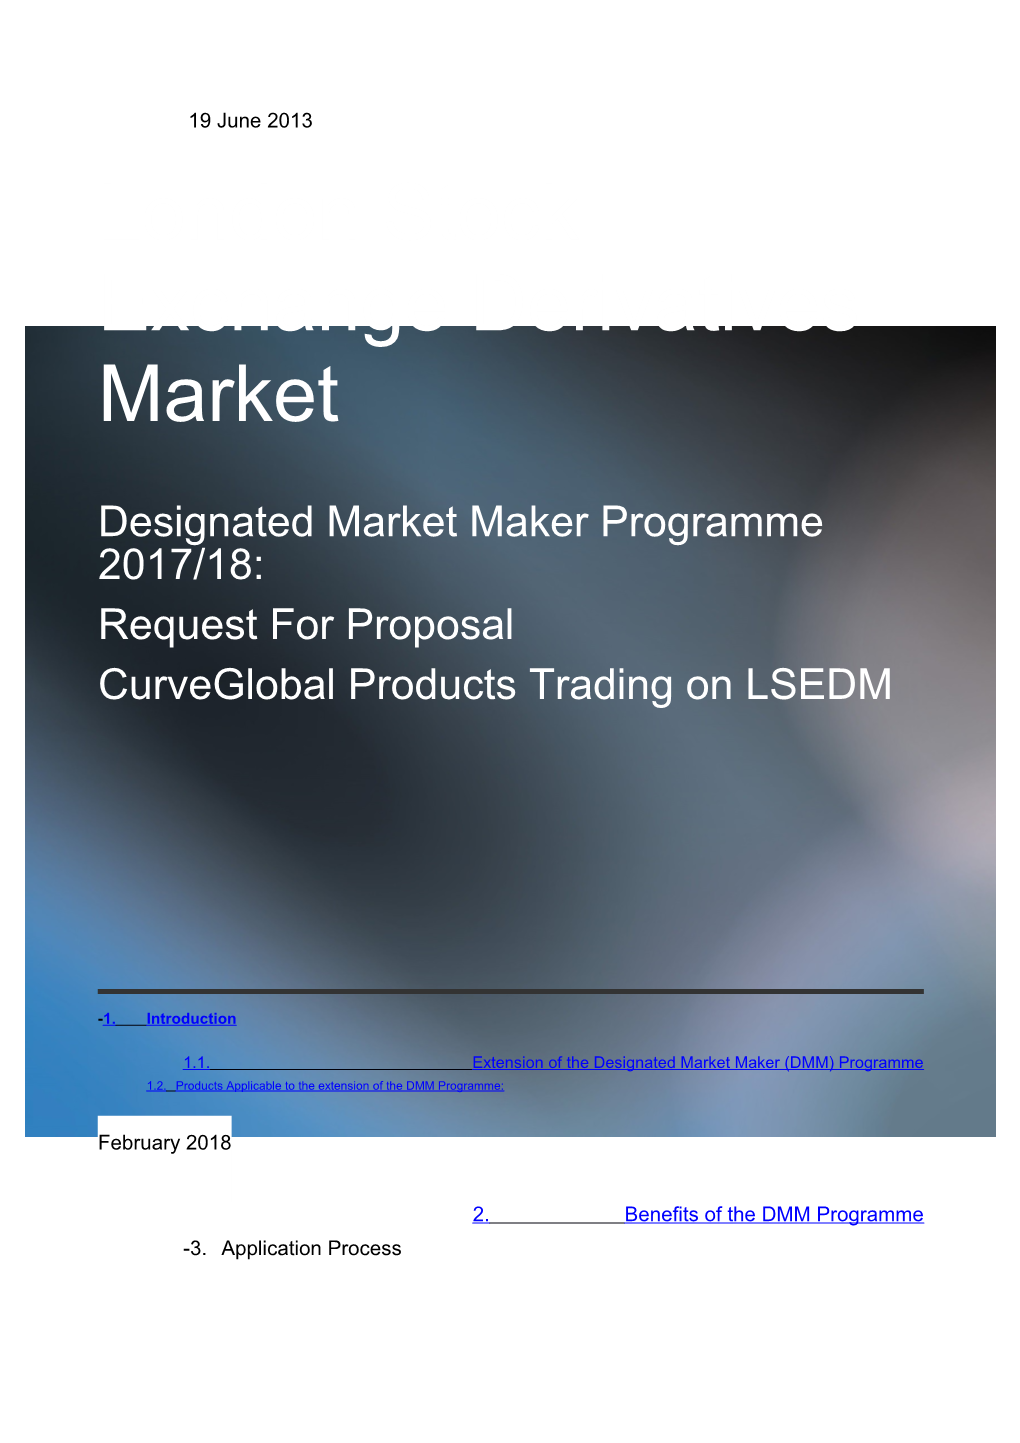 1.2. Products Applicable to the Extension of the DMM Programme: 4